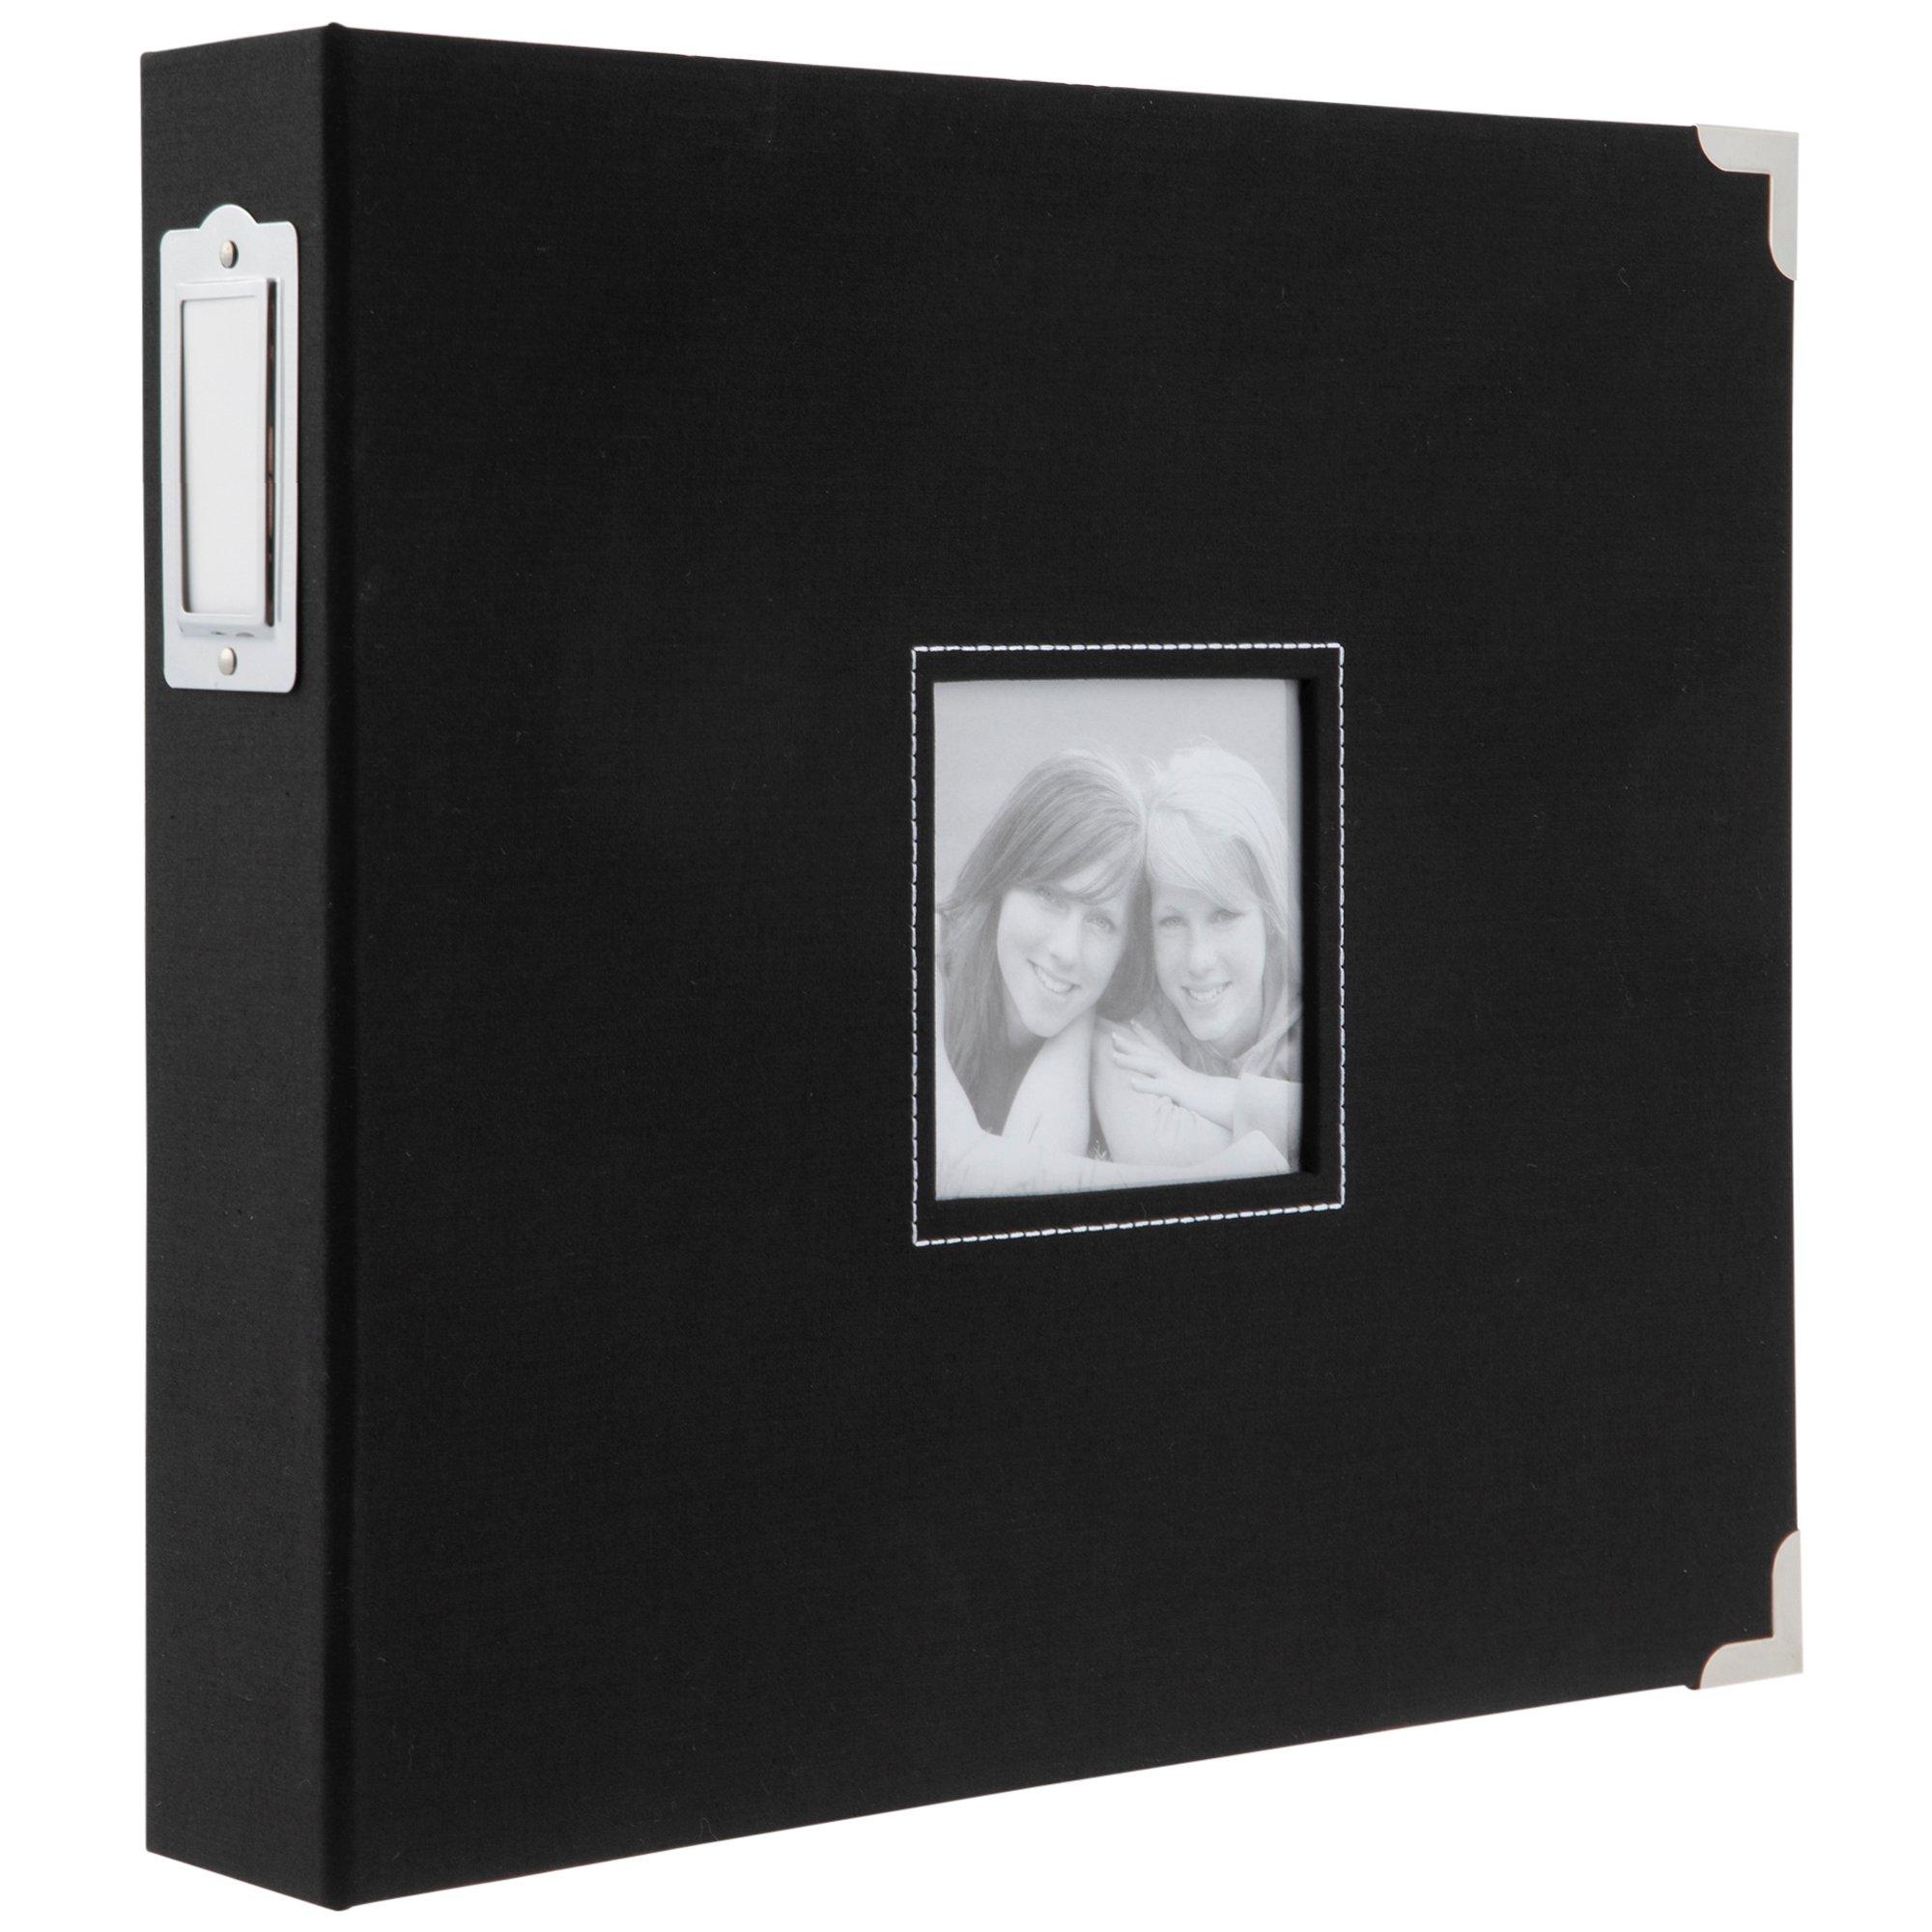  12x12 Scrapbook - Photo Album Pages for 3 Ring Binder